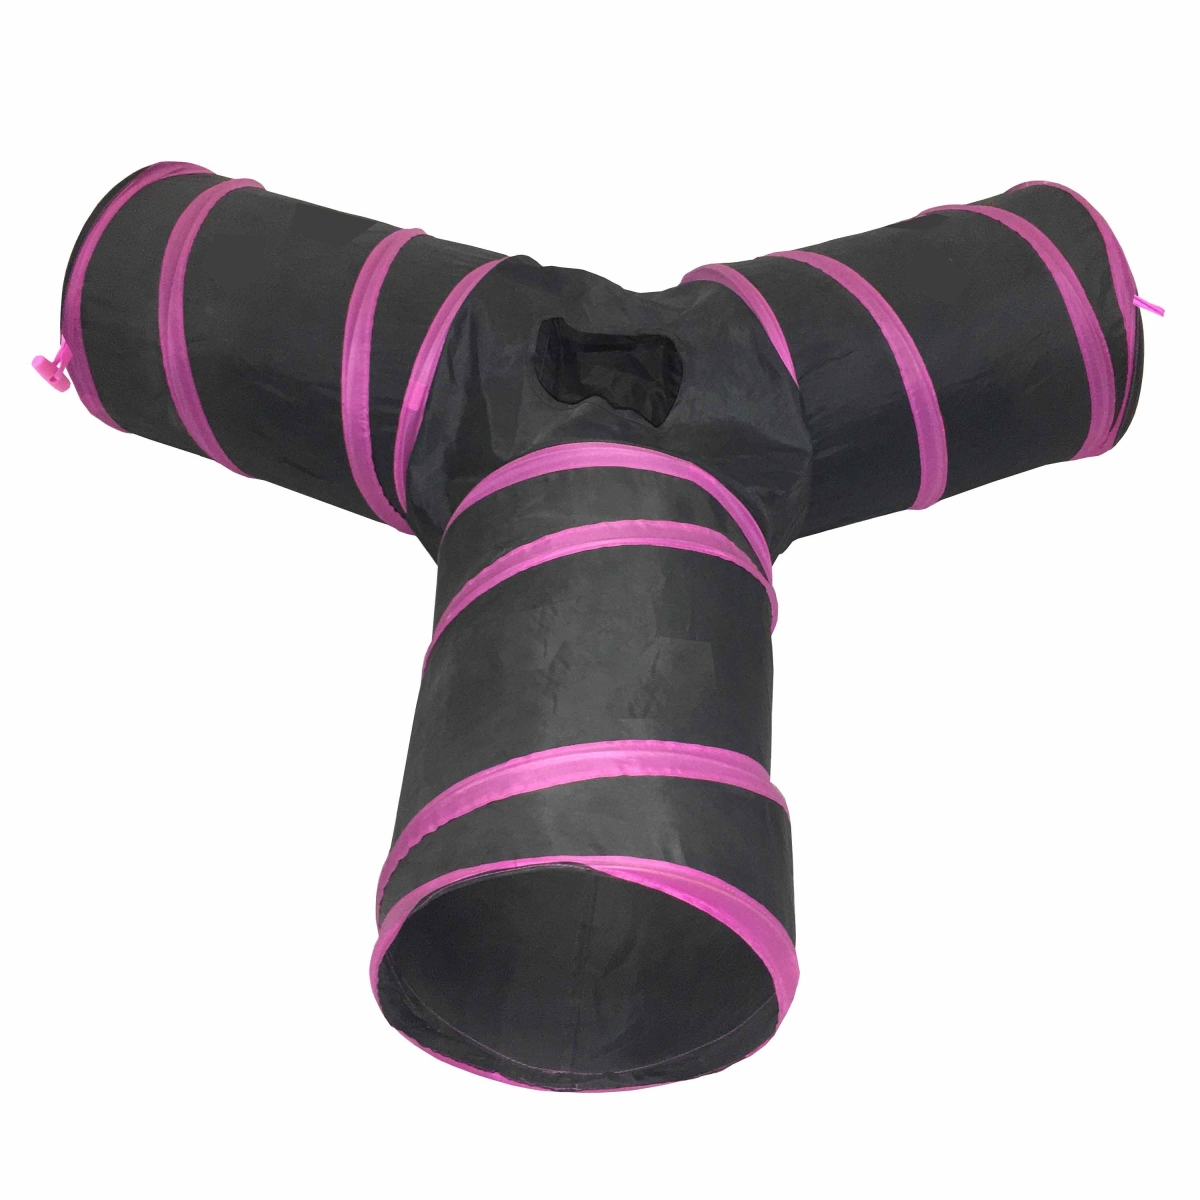 3 Way Kitting Interactive Collapsible Passage Kitty Cat Tunnel, Pink & Black - One Size